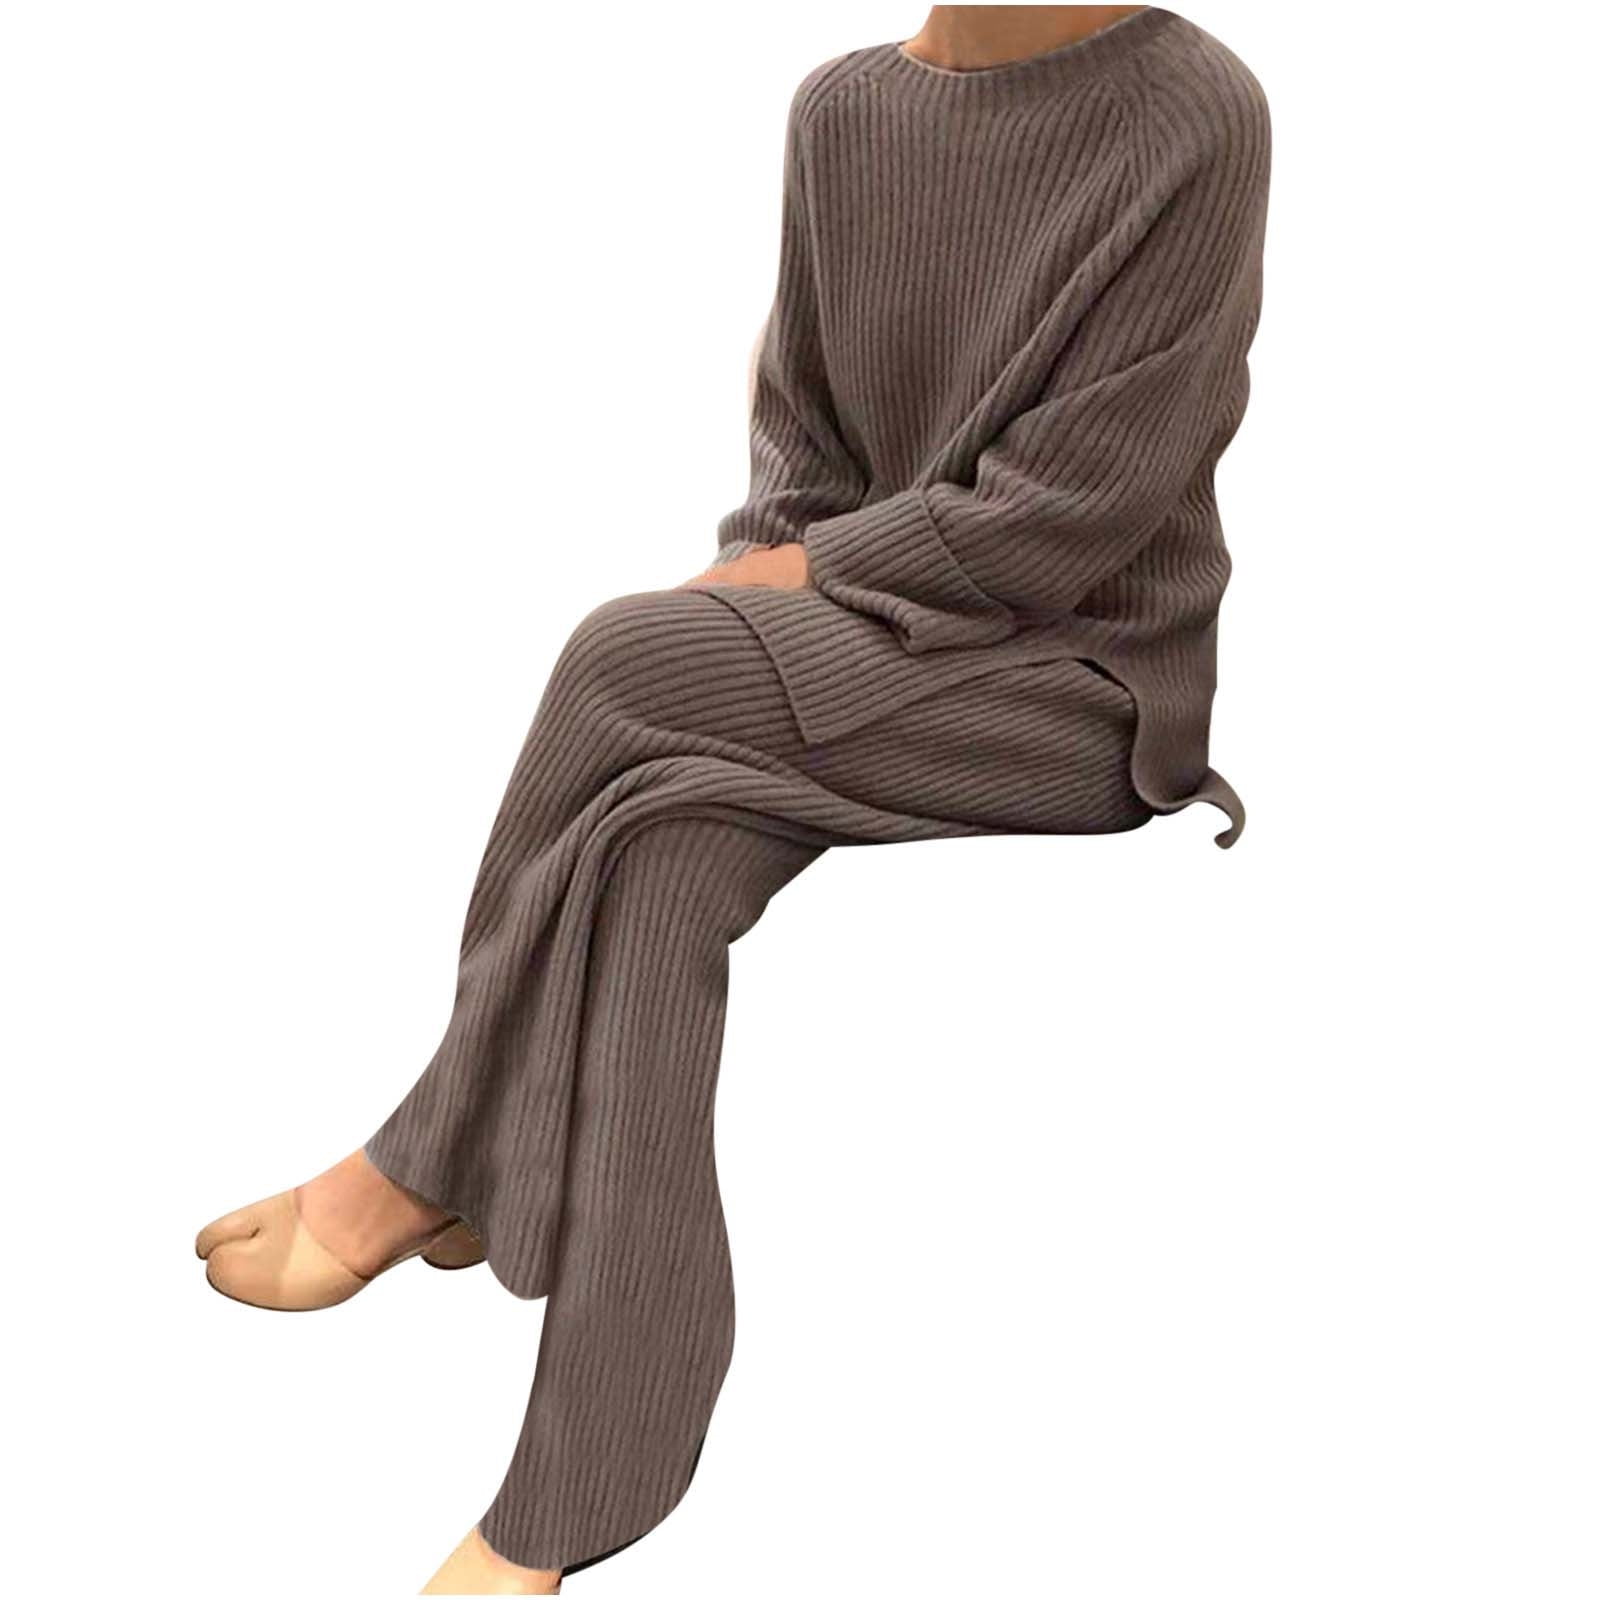 Women's 2-pc. Sweater Knit Loungewear Pant Set, Created For Macy's In  Toasted Peanut